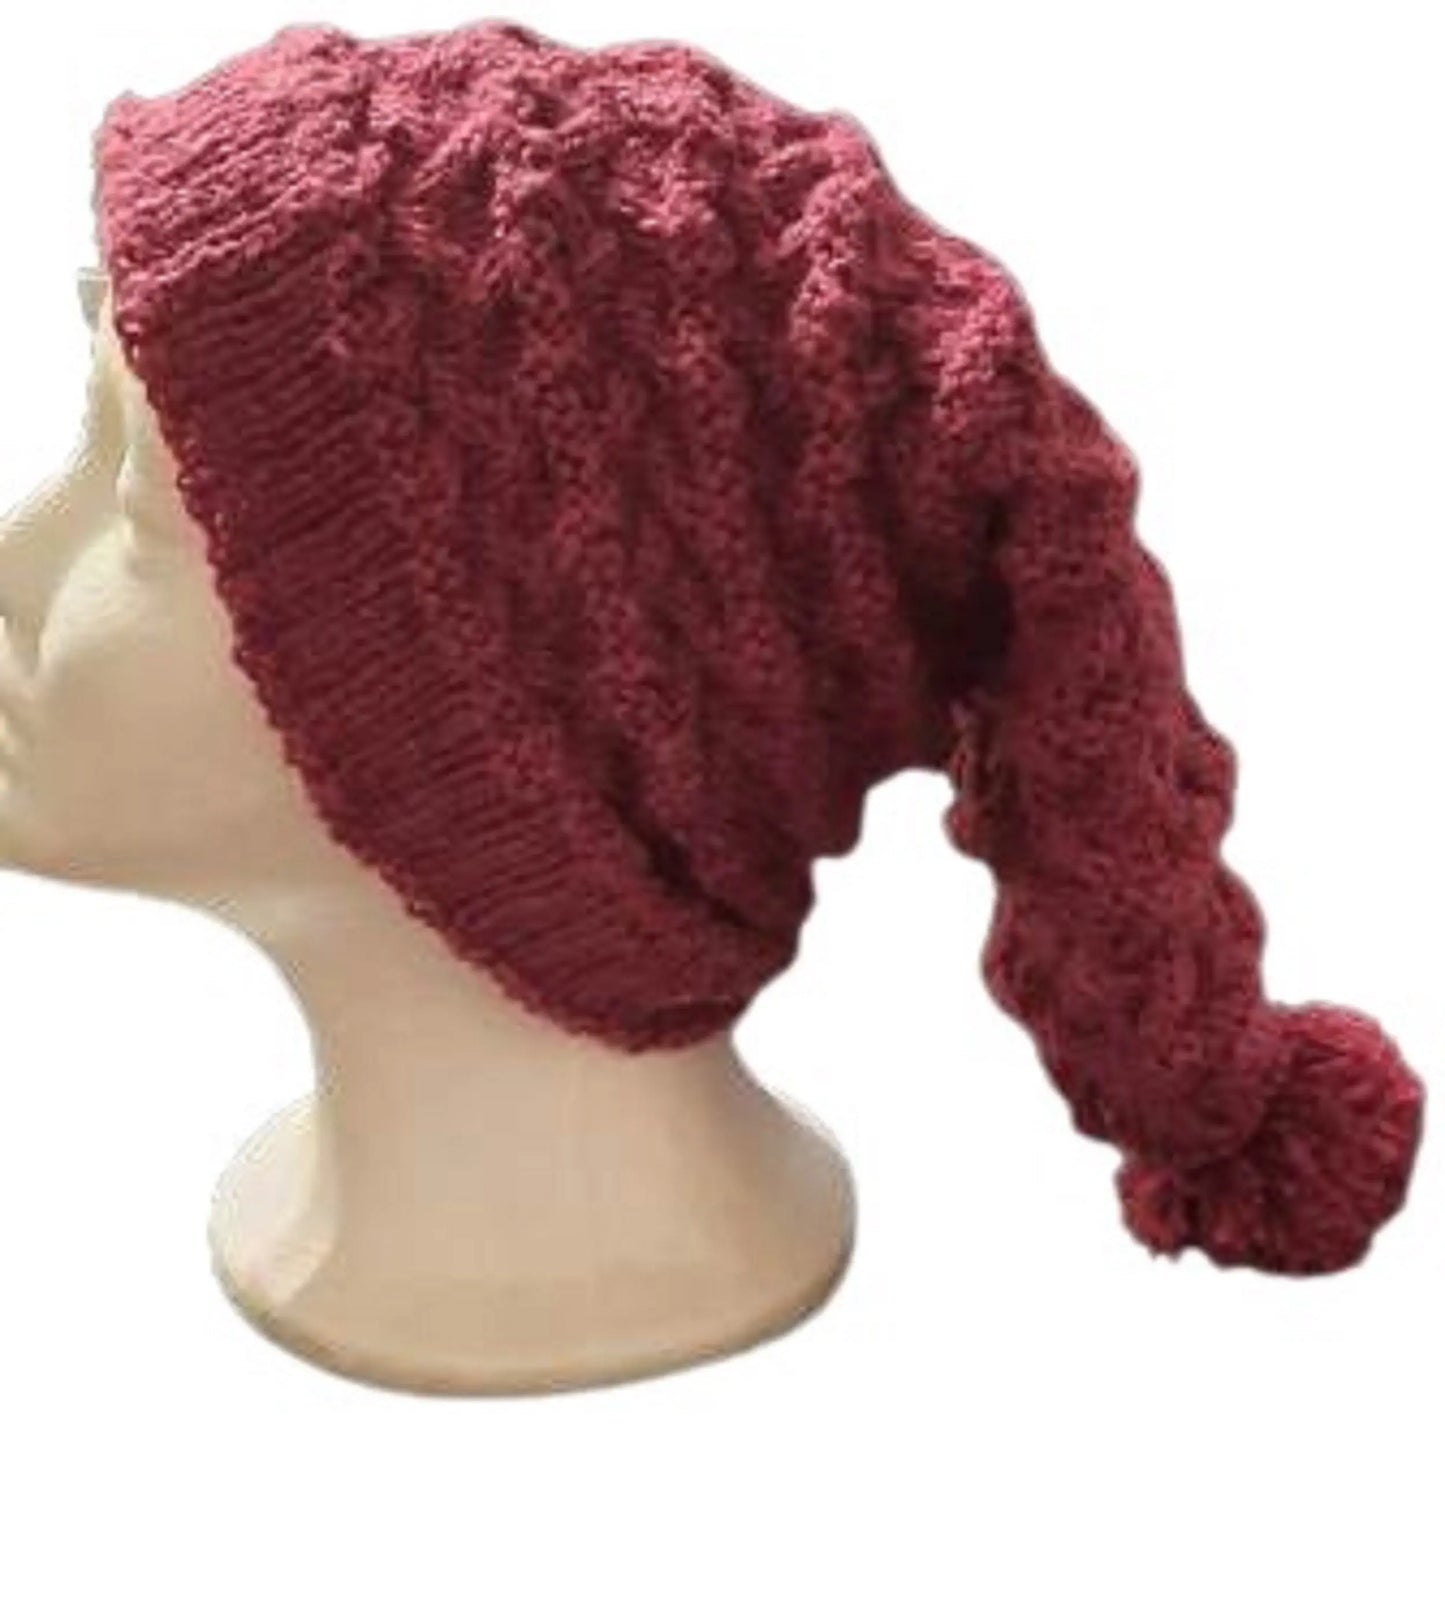 "Enchanting Burgundy Pixie Hat: Hand Knitted Delight for Your Adventurous Spirit" - Image #1